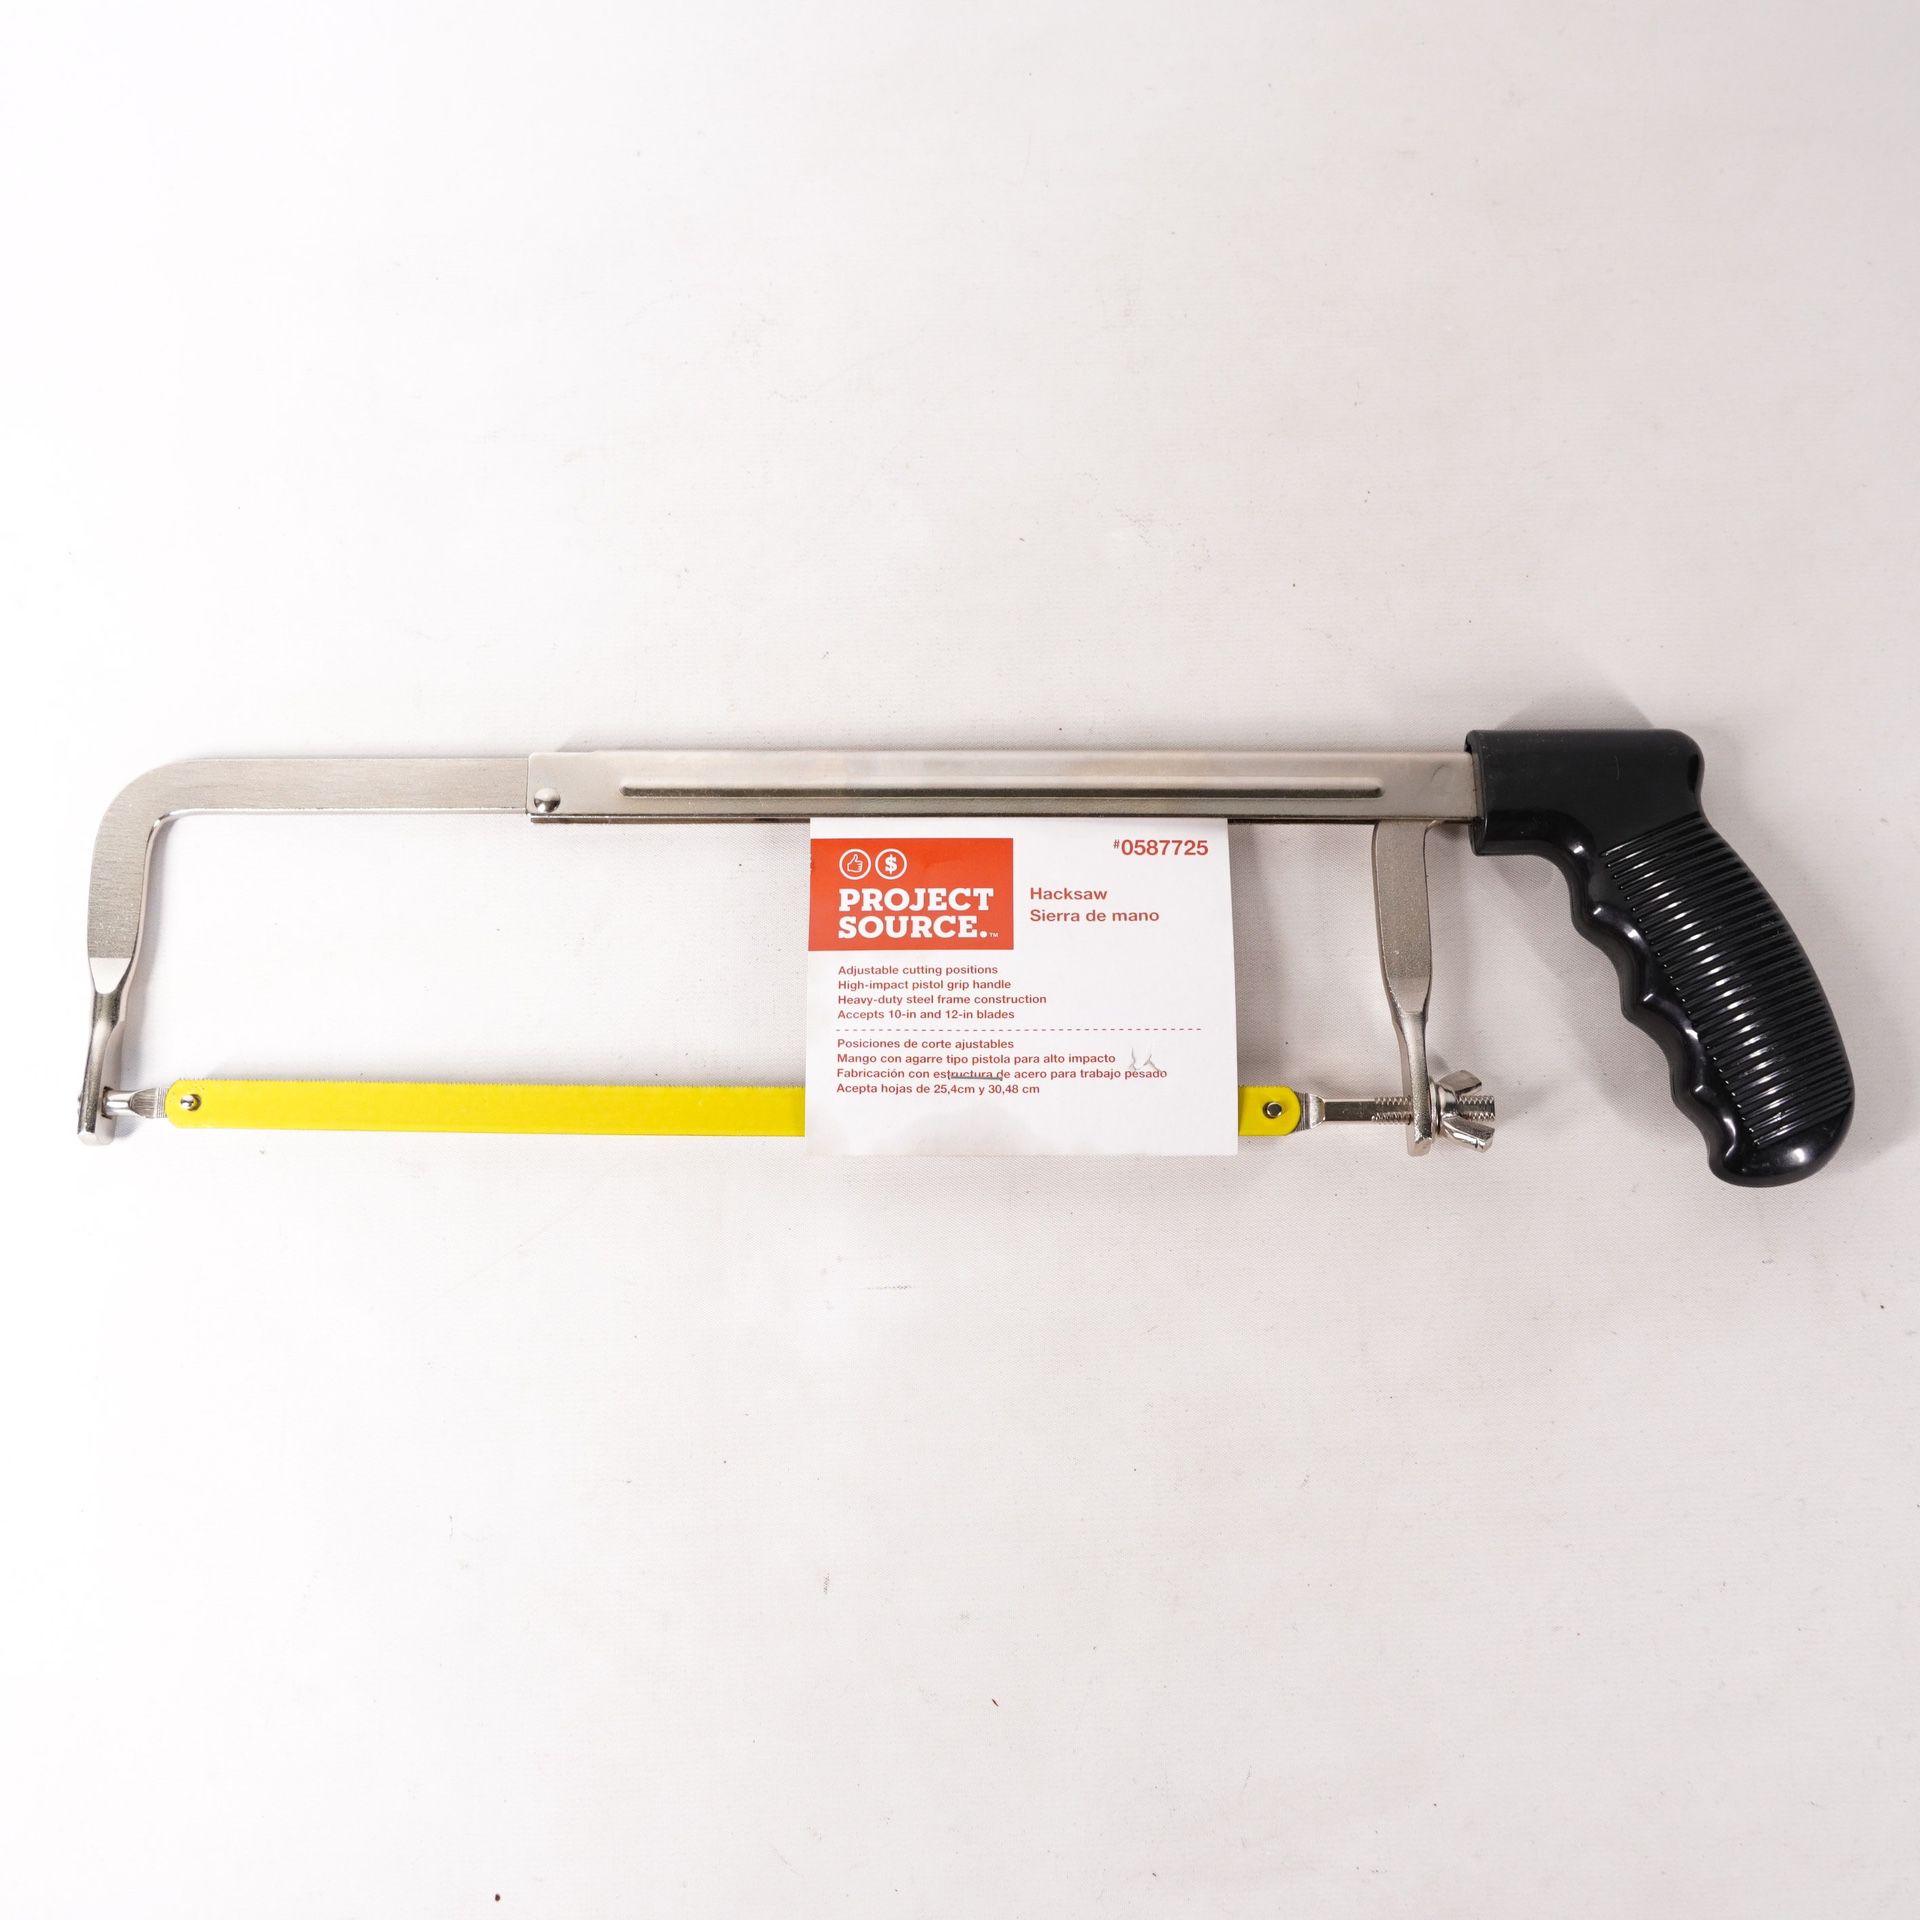 Project Source Stainless Steel 12" Hacksaw Saw #0587725